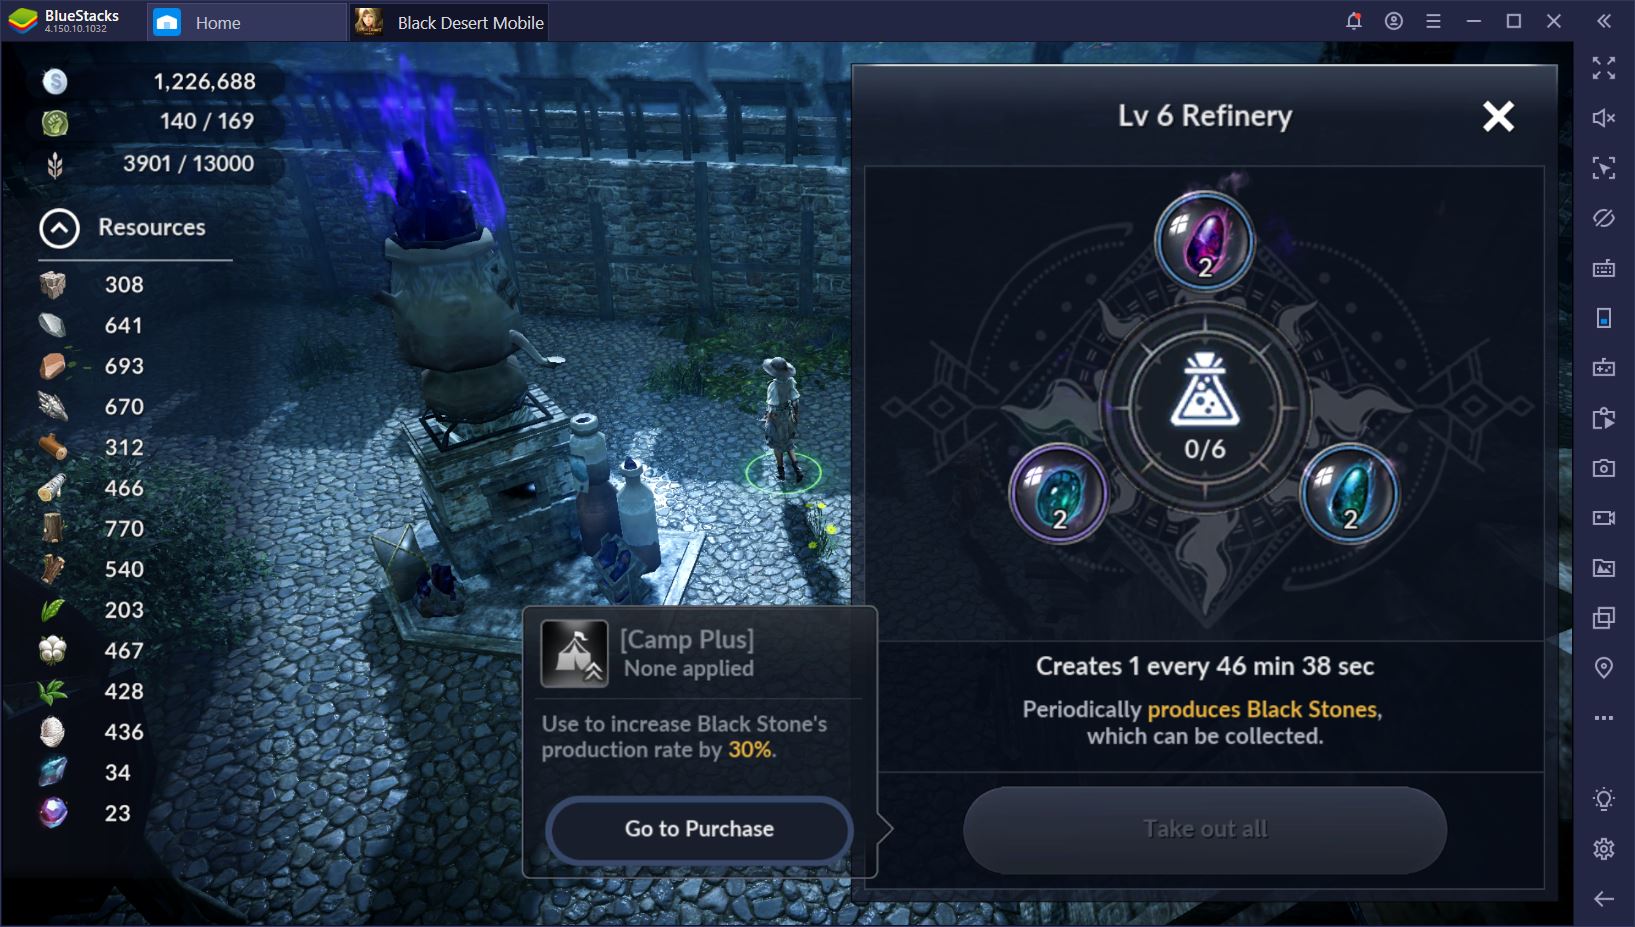 Black Desert Mobile: Learn Everything About Your Camp